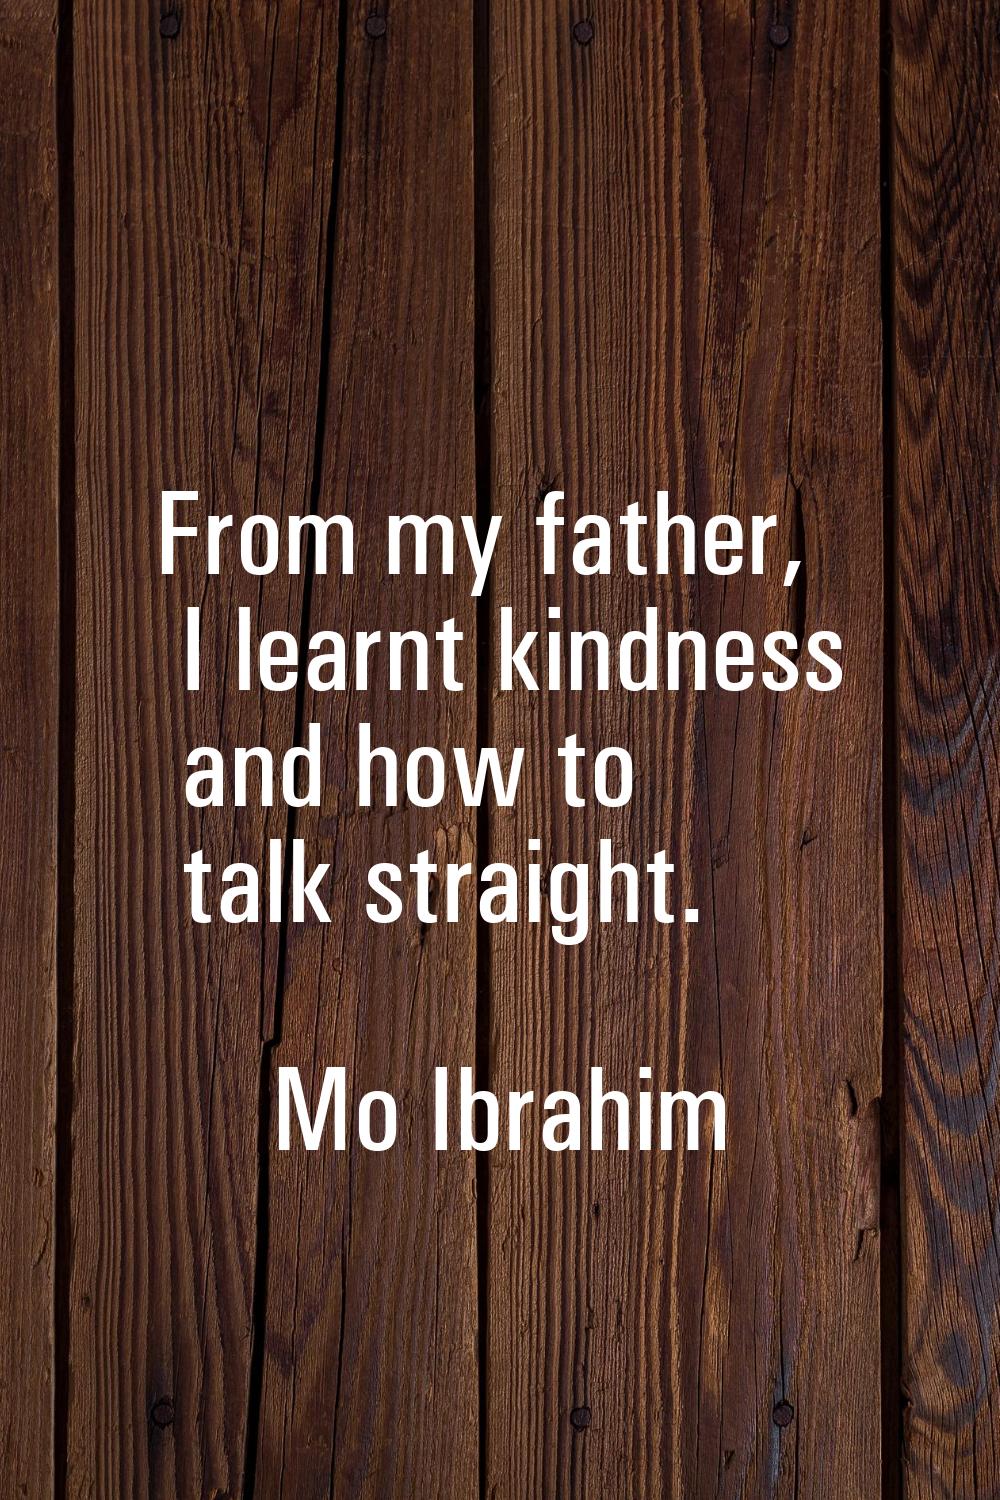 From my father, I learnt kindness and how to talk straight.